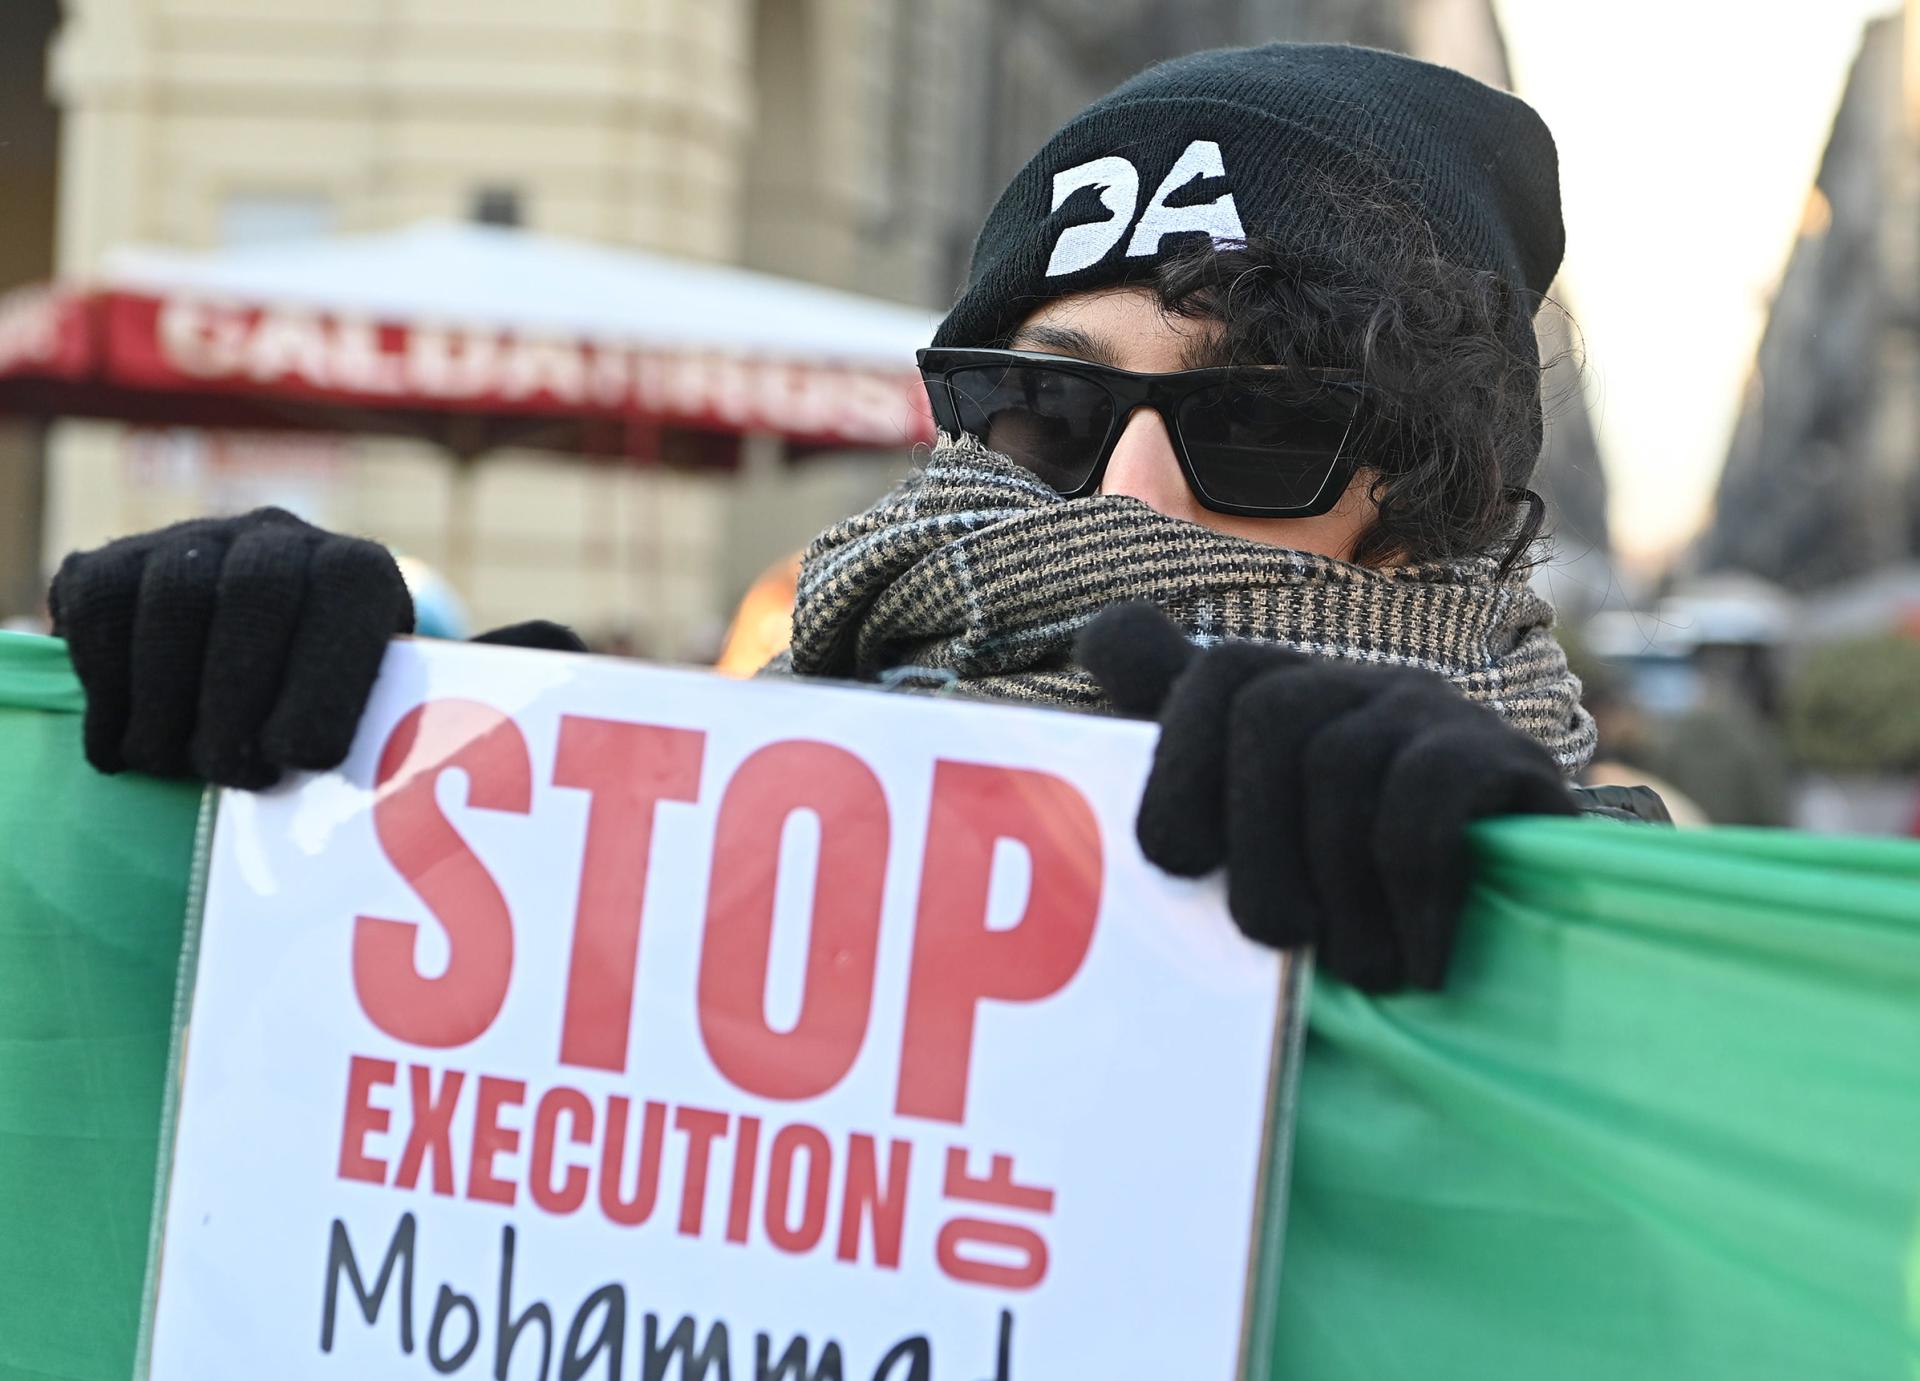 A protester holds a placard as people attend a demonstration against Iran's regime staged by the Iranian community, in Turin, Italy, 17 December 2022, following Iran's sentencing to death and public execution of two young demonstrators, Mohsen Shekari and Majidreza Rahnavard, for participating in demonstrations against the regime. EFE-EPA FILE/ALESSANDRO DI MARCO
